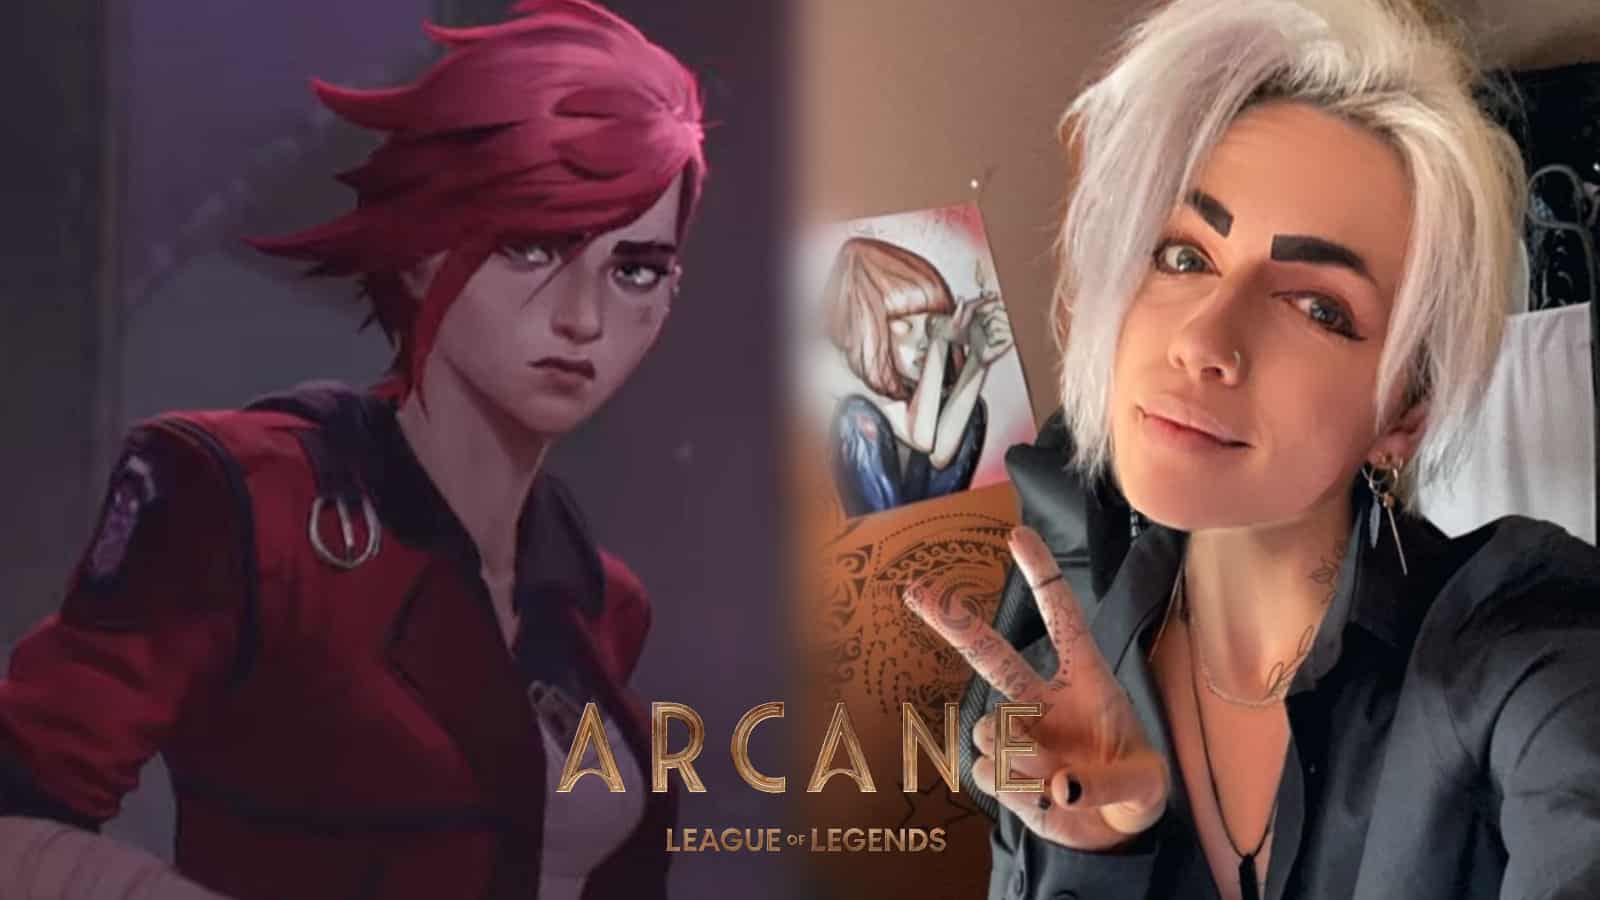 park poll Corrupt League cosplayer delivers justice as Arcane's fearsome Vi - Dexerto